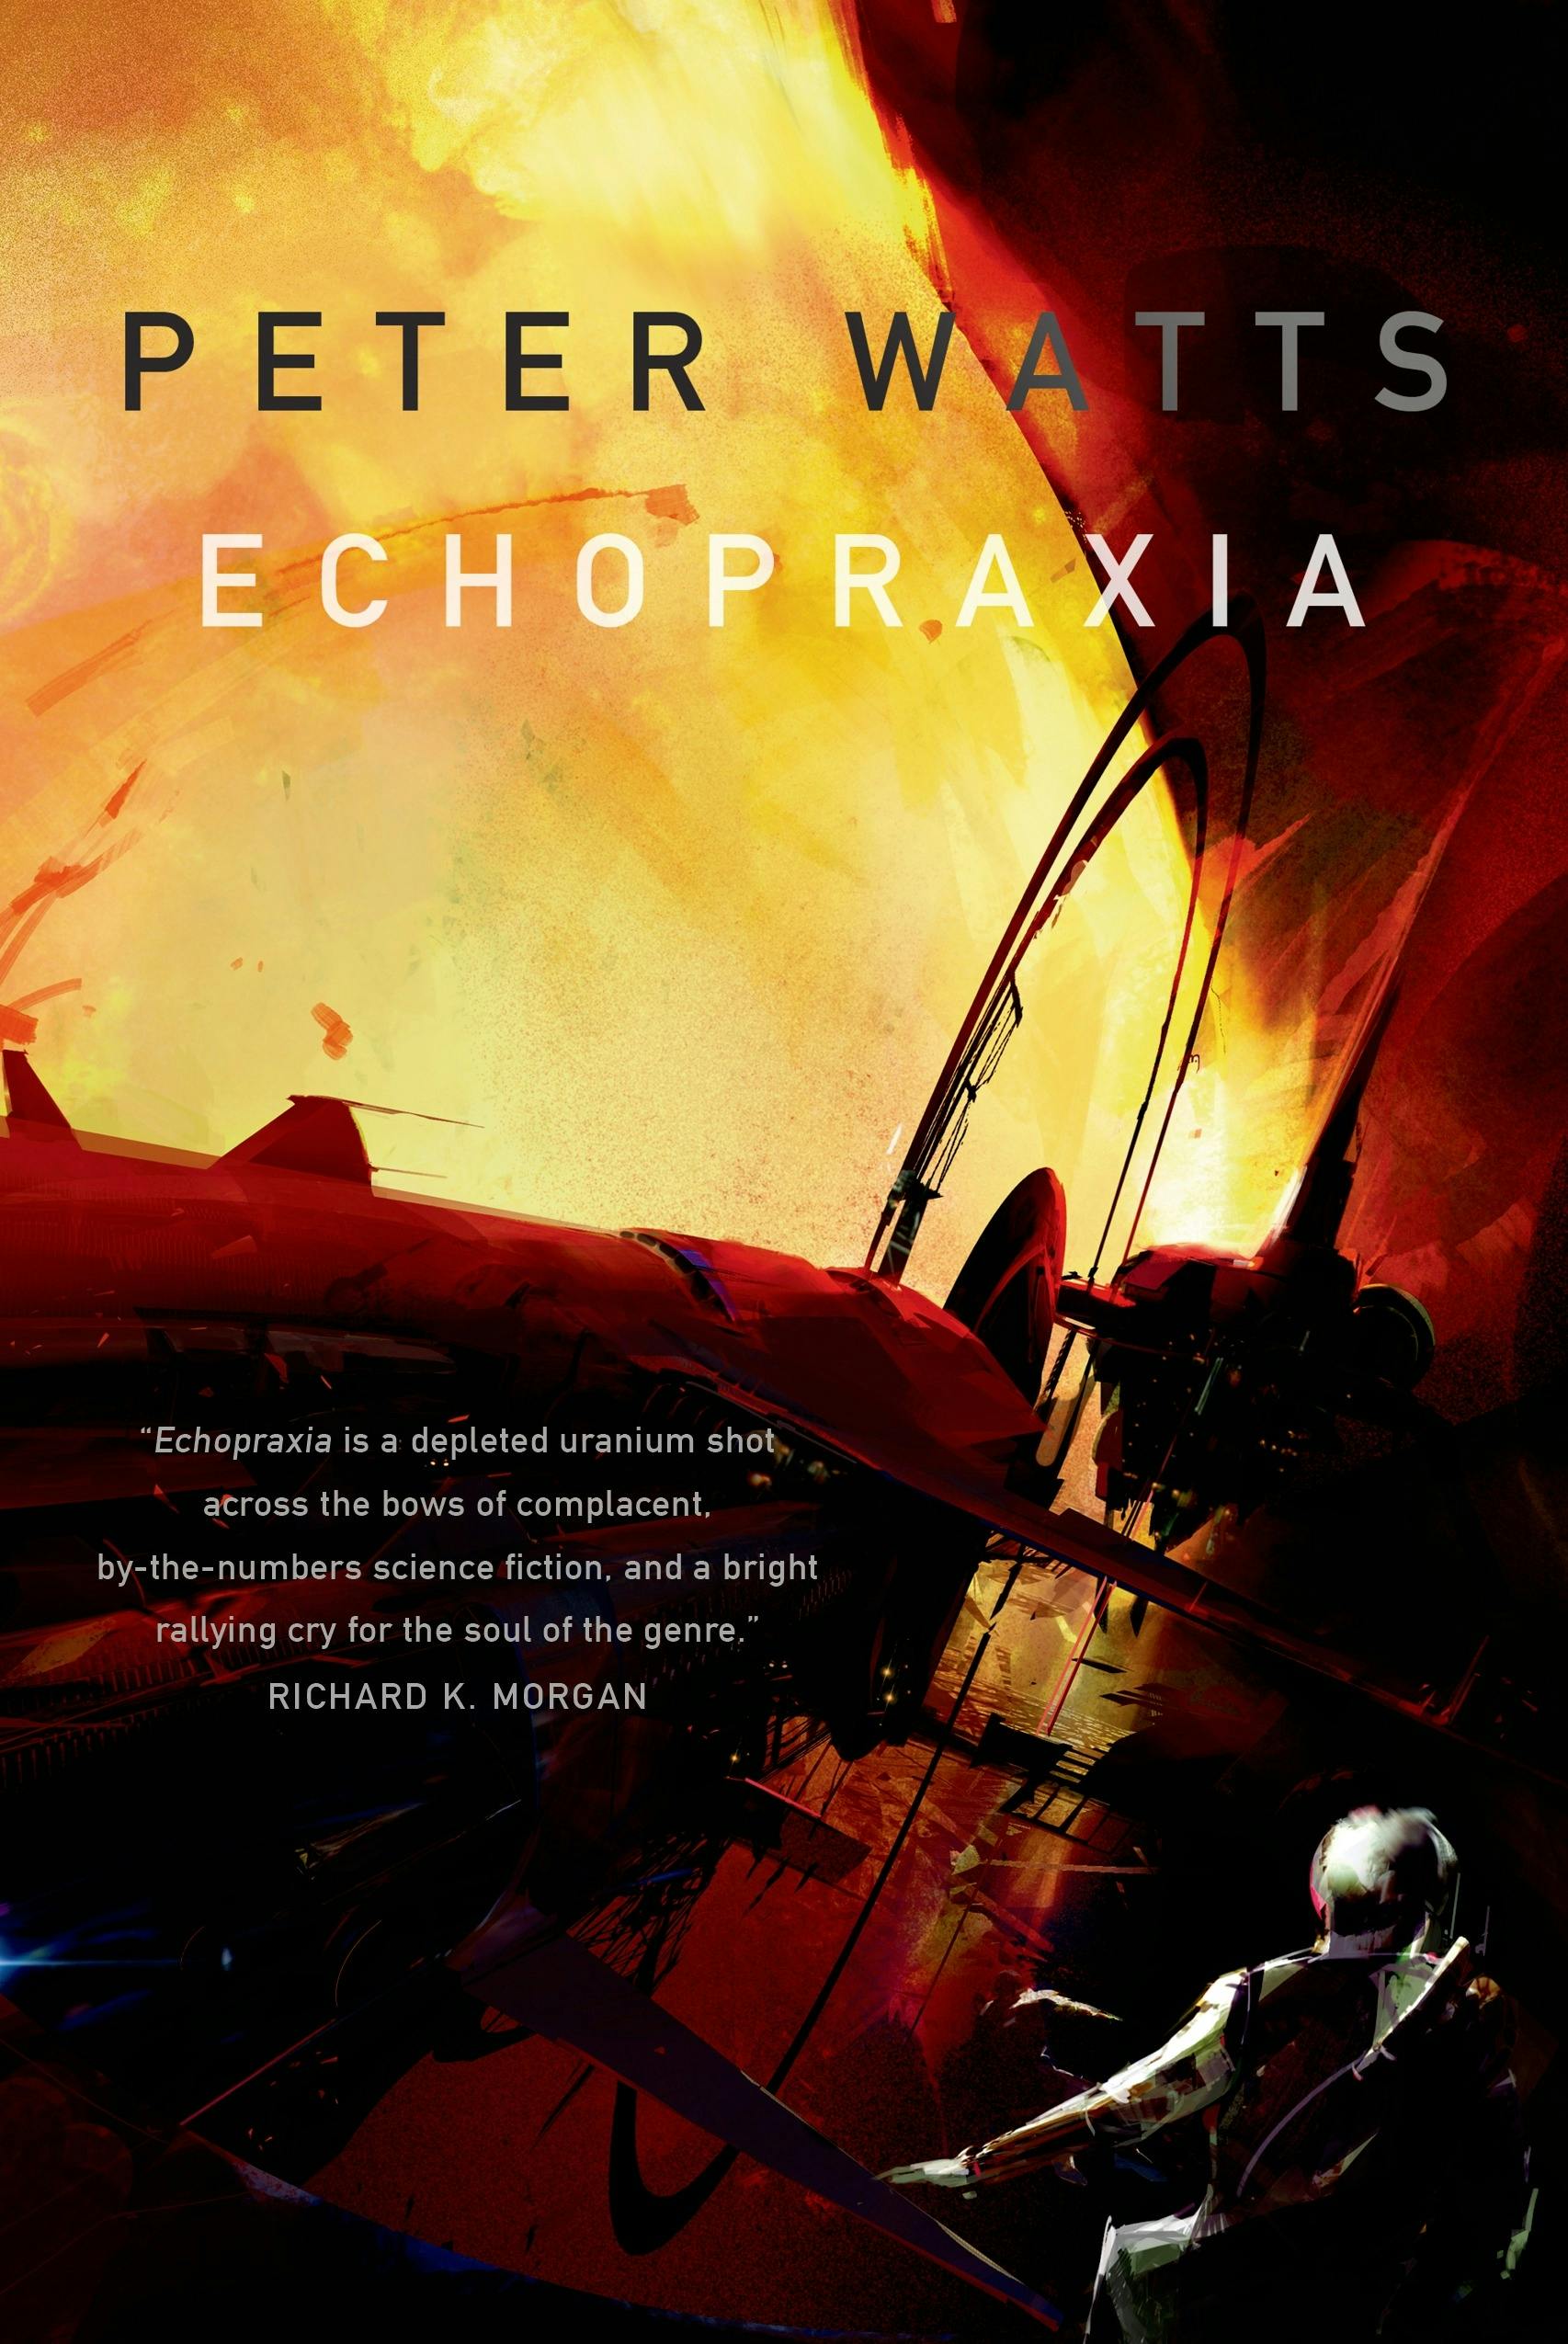 Cover for the book titled as: Echopraxia